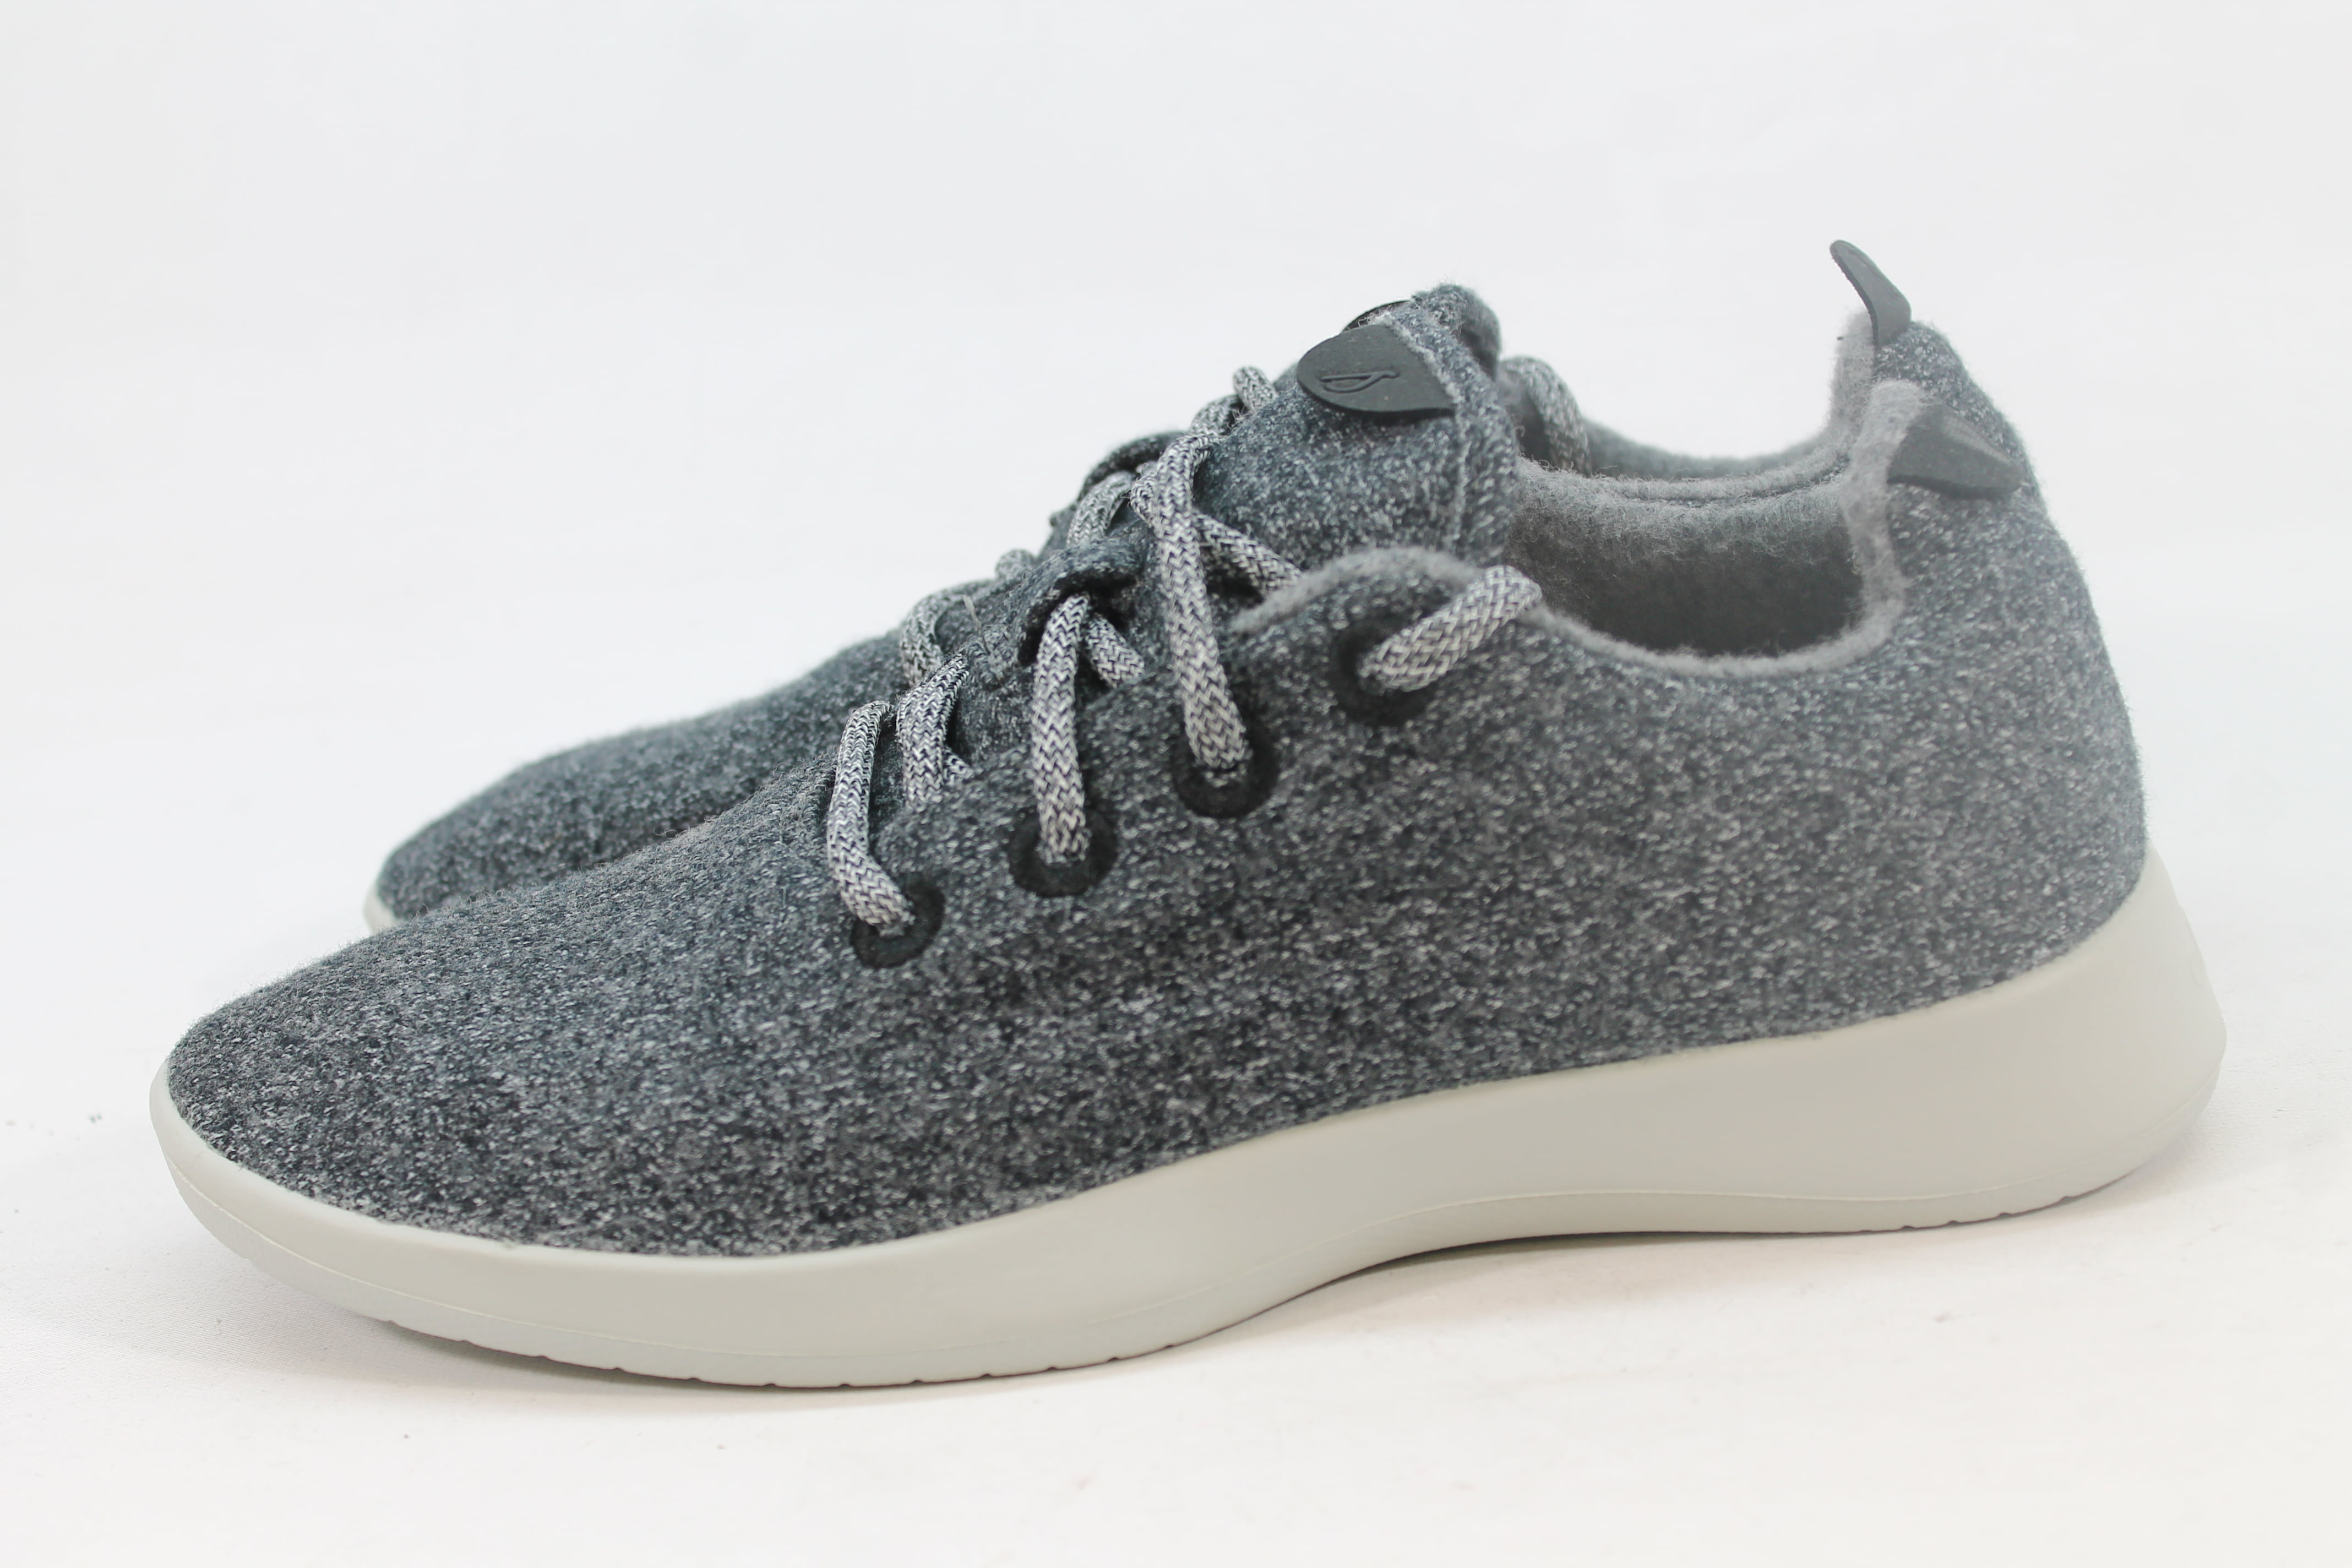 Details about   Allbirds Women's Wool Runners Tuke Teal/Teal Sole Comfort Shoes NW/OB